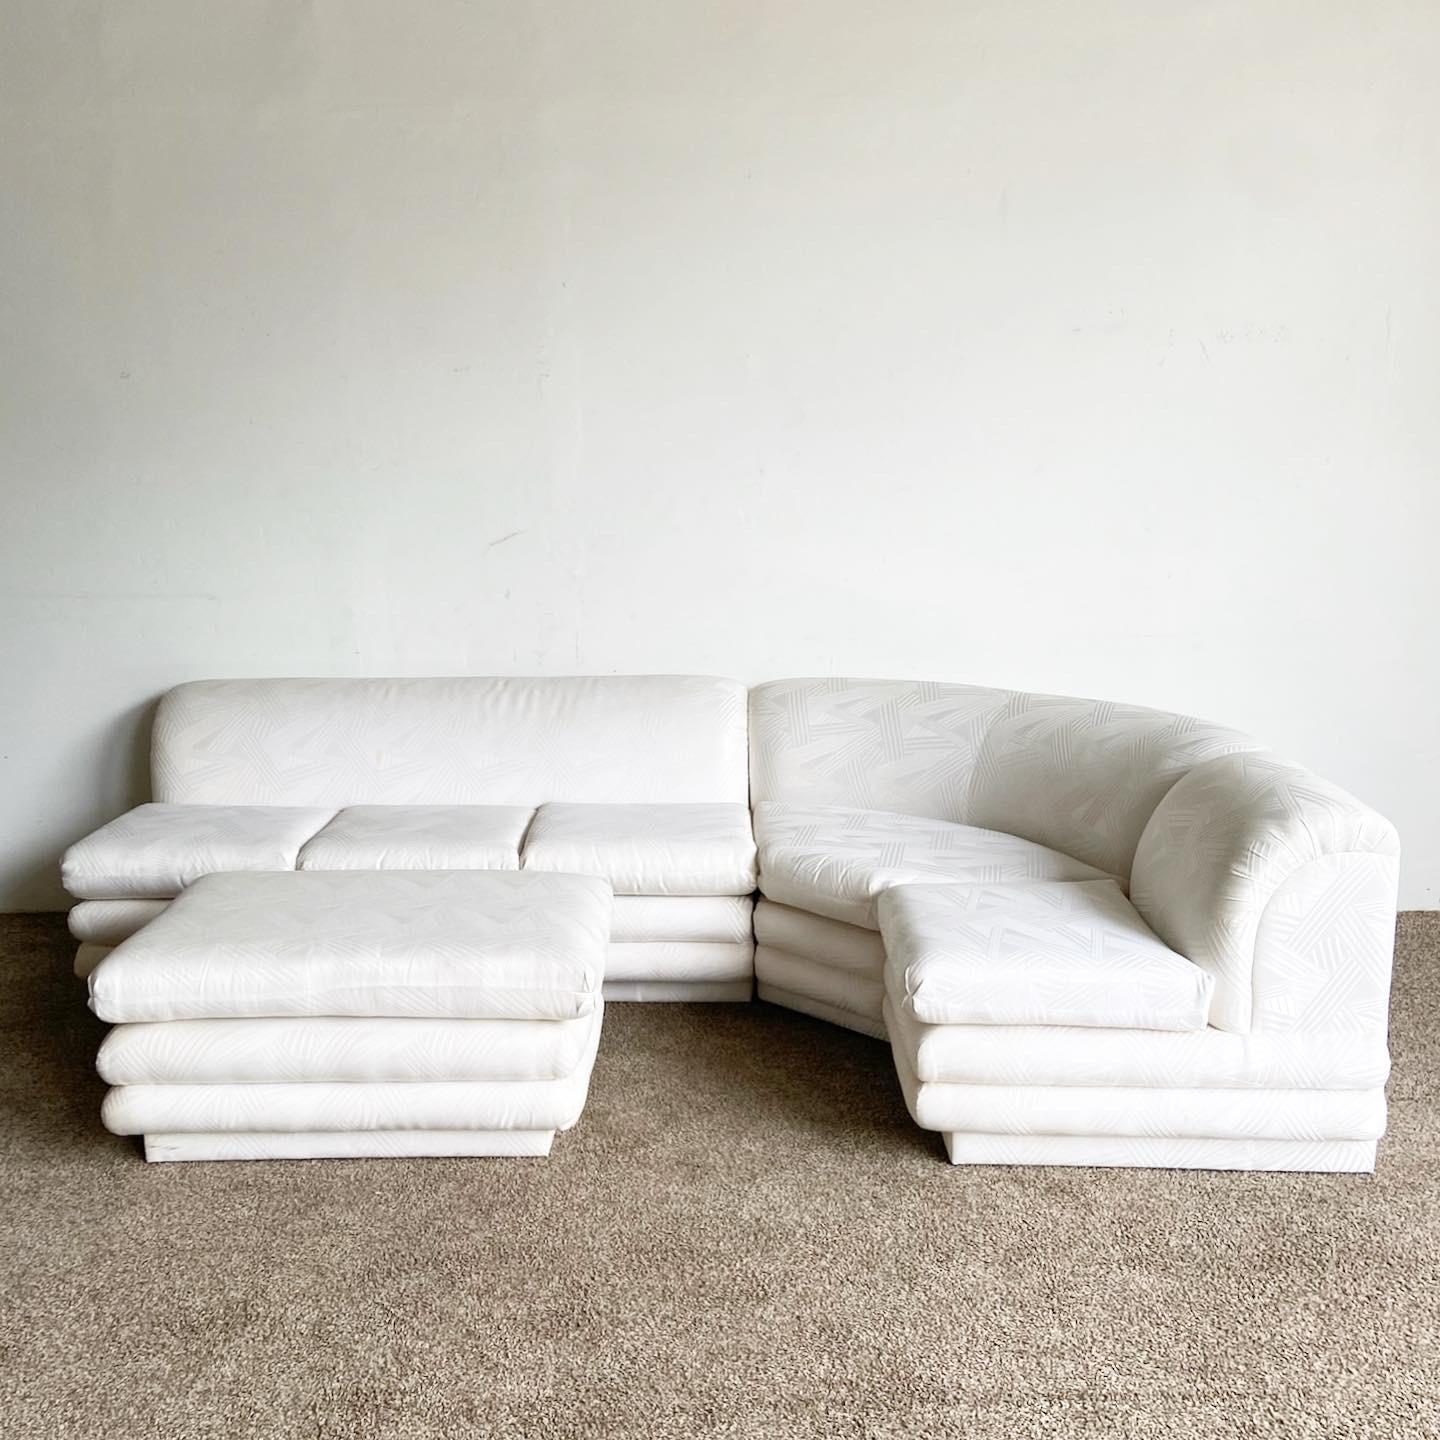 Postmodern When Sectional Sofa with Ottoman - 4 Pieces 3